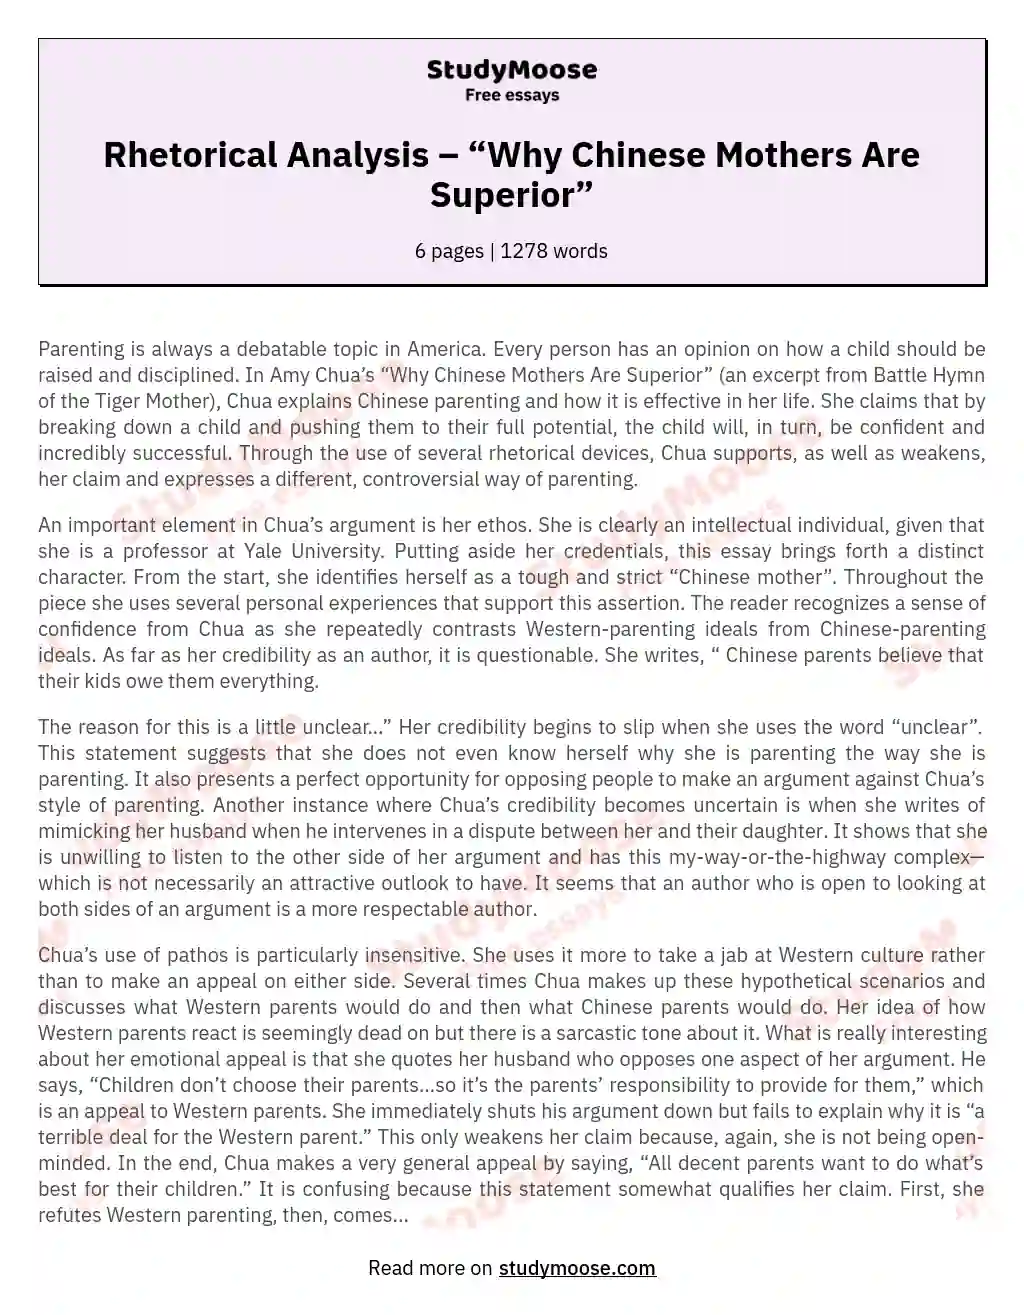 Rhetorical Analysis – “Why Chinese Mothers Are Superior” essay